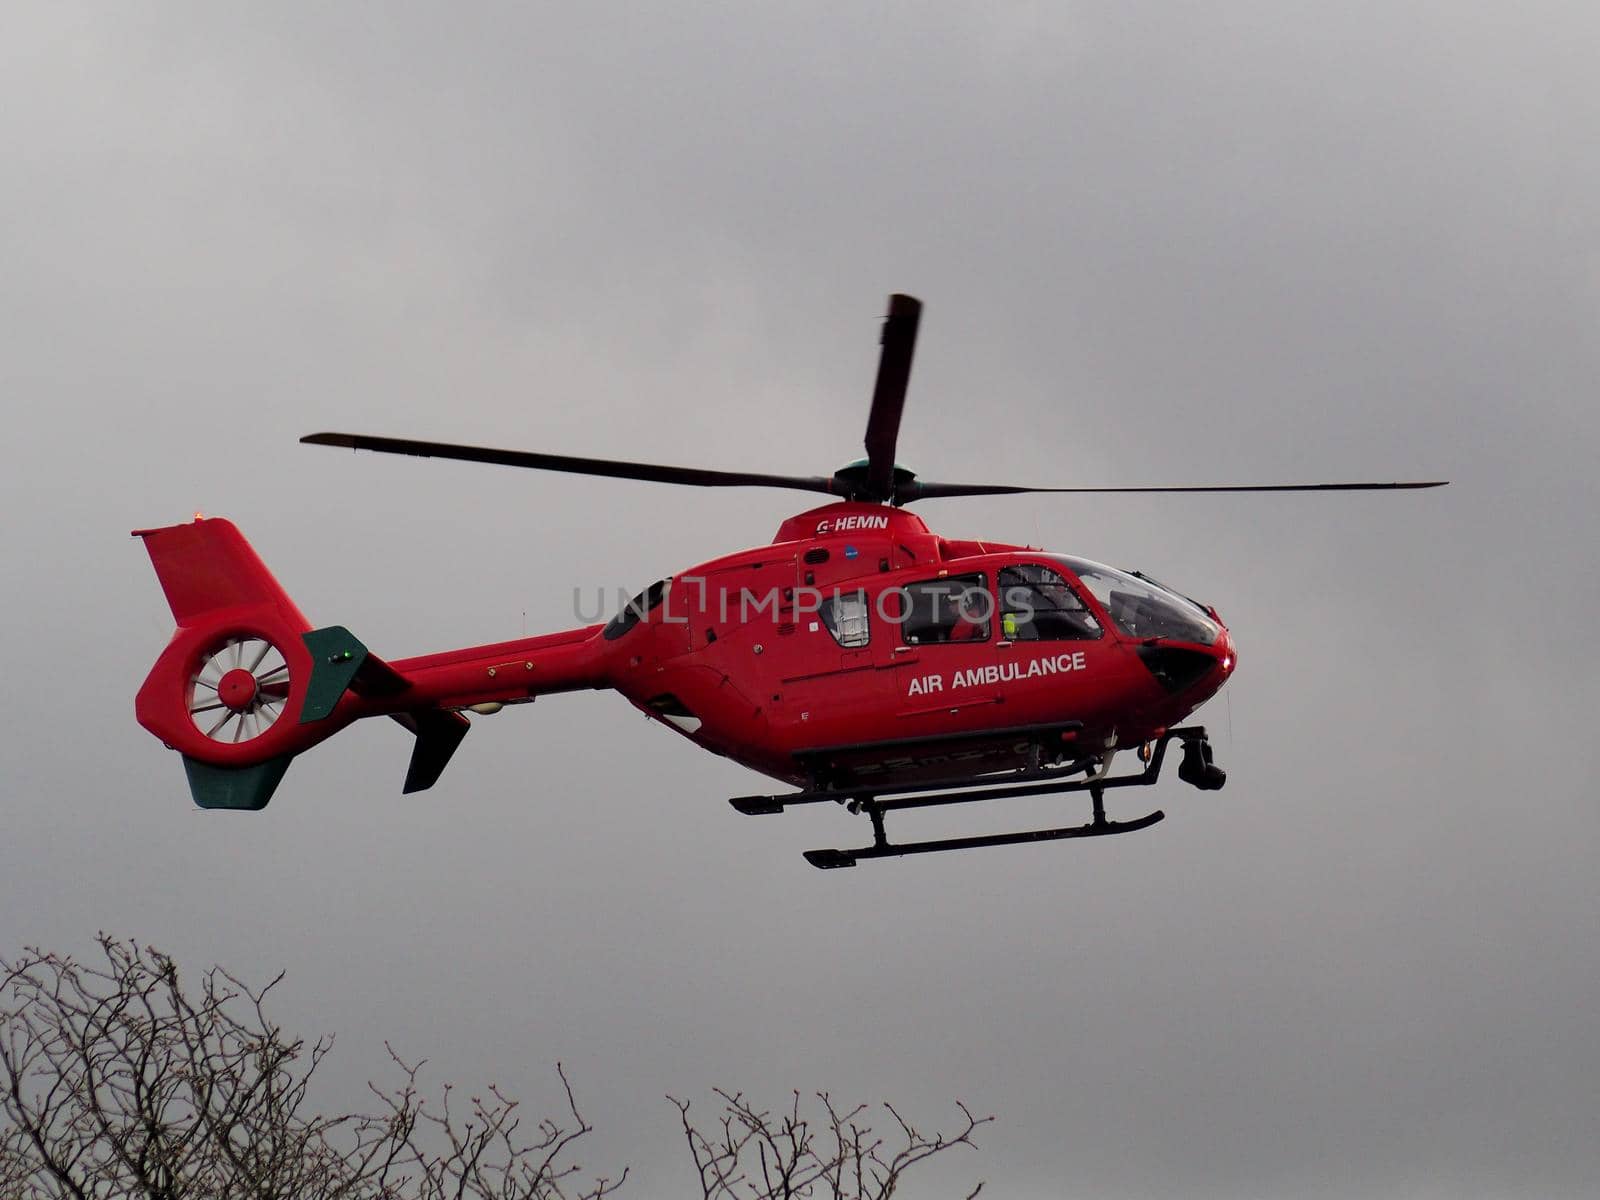 Air Ambulance landing to attend to an emergency by PhilHarland